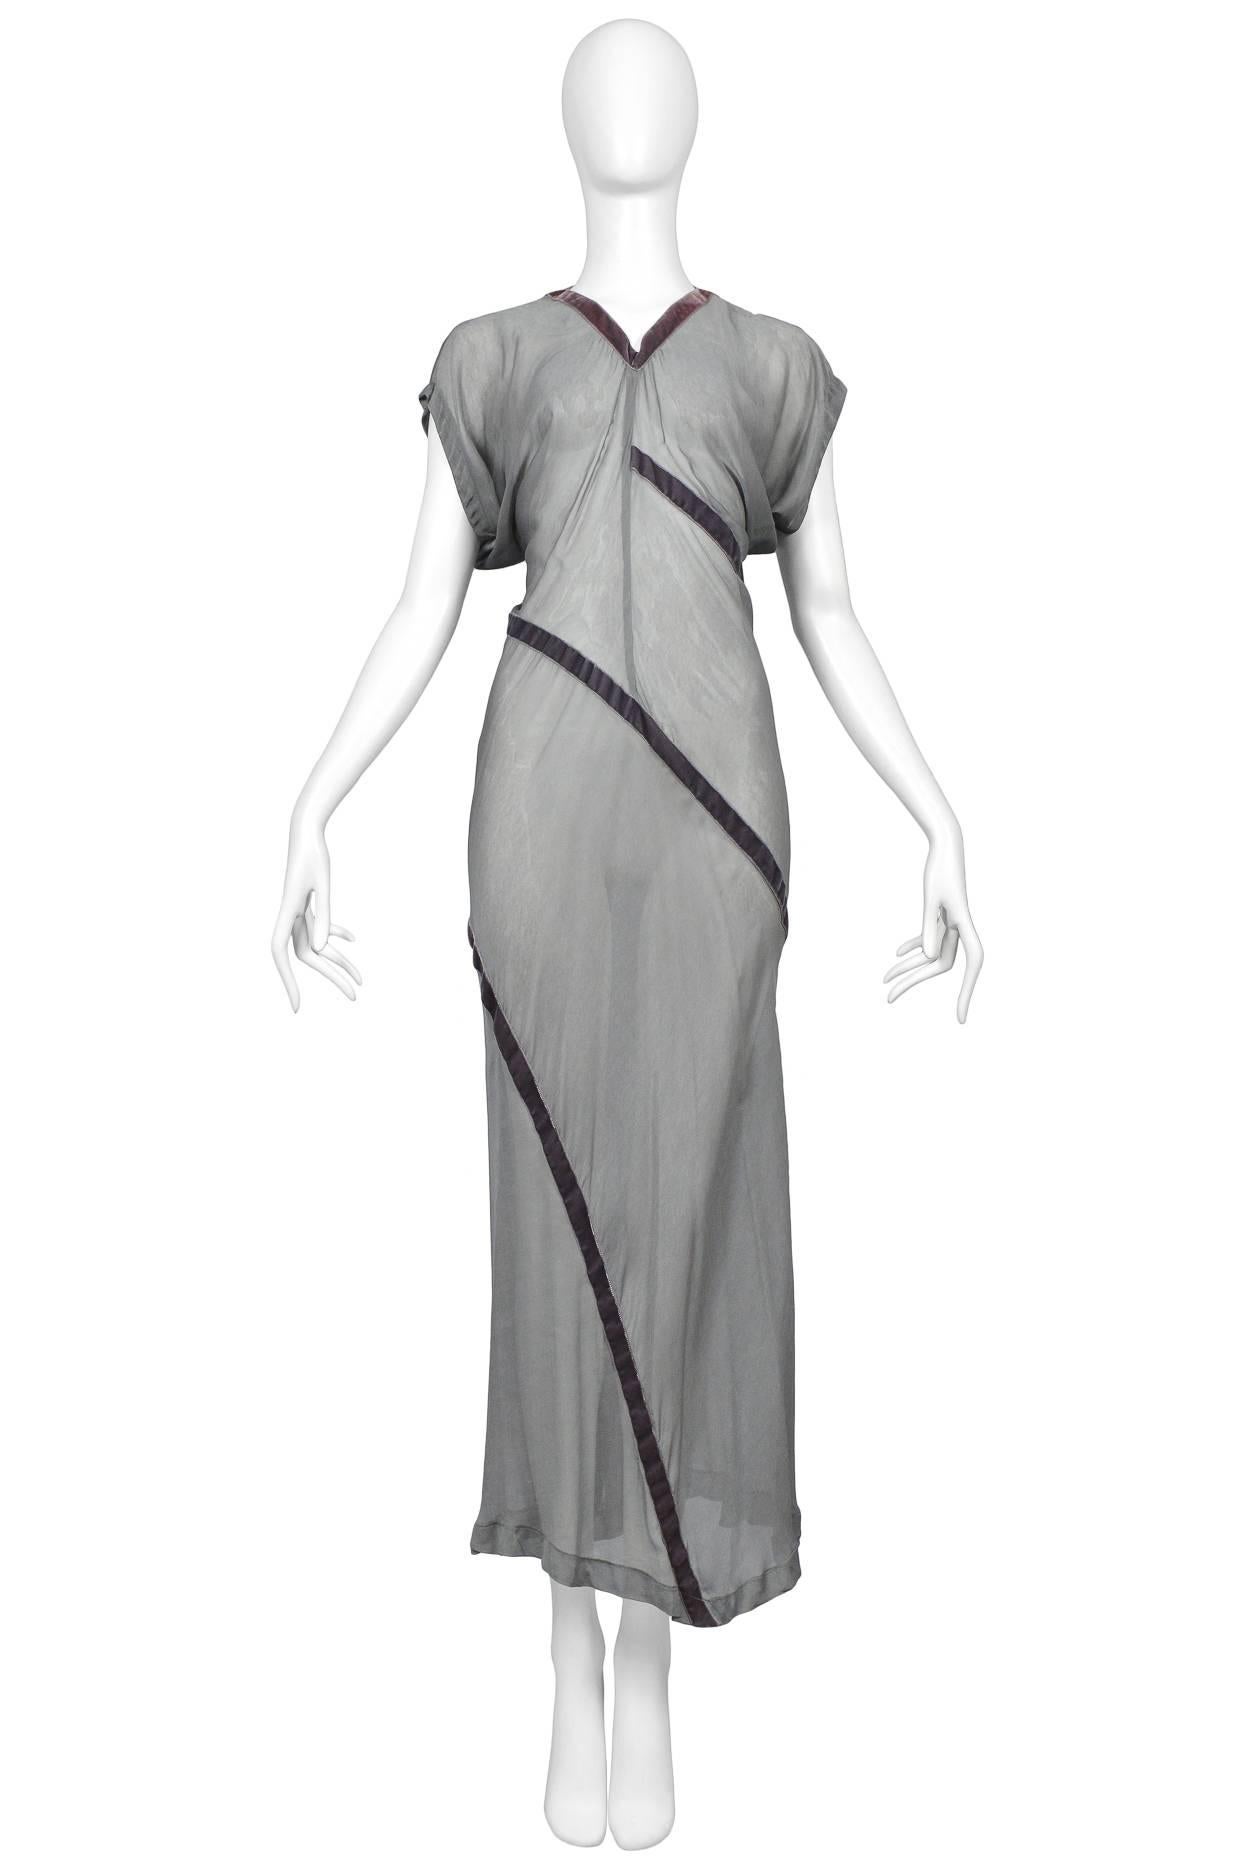 Vintage Comme des Garcons sheer grey lilac v-neck maxi dress featuring velvet trim throughout the bodice and along the neckline.